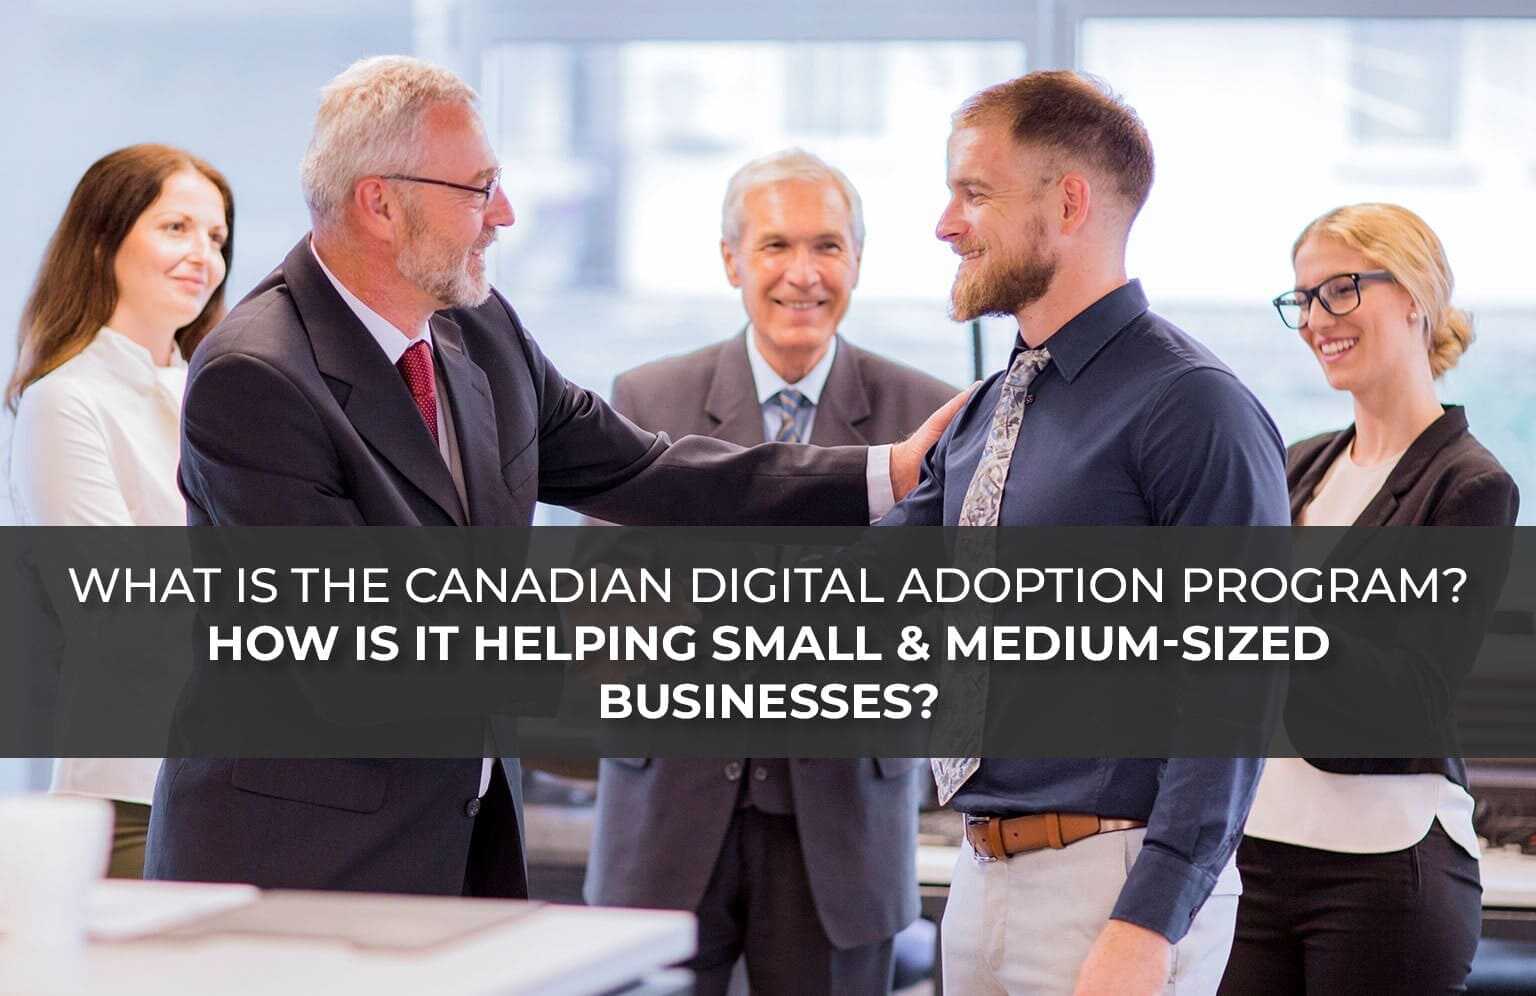 How Canadian Digital Adoption Program is Helping Small and Medium-Sized Businesses